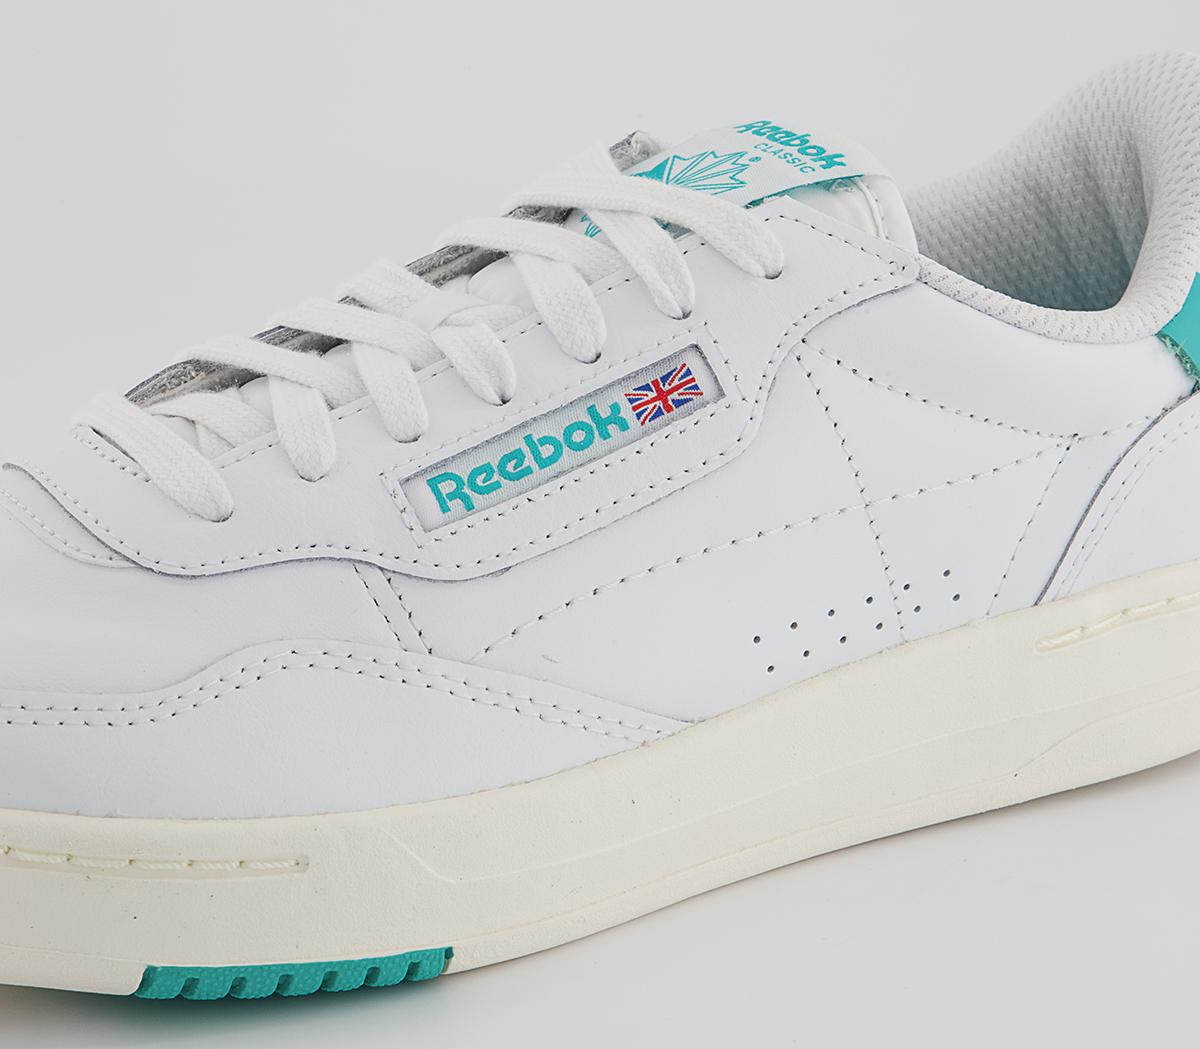 Reebok Court Peak Trainers White Chalk Teal - Best Of Bank Holiday